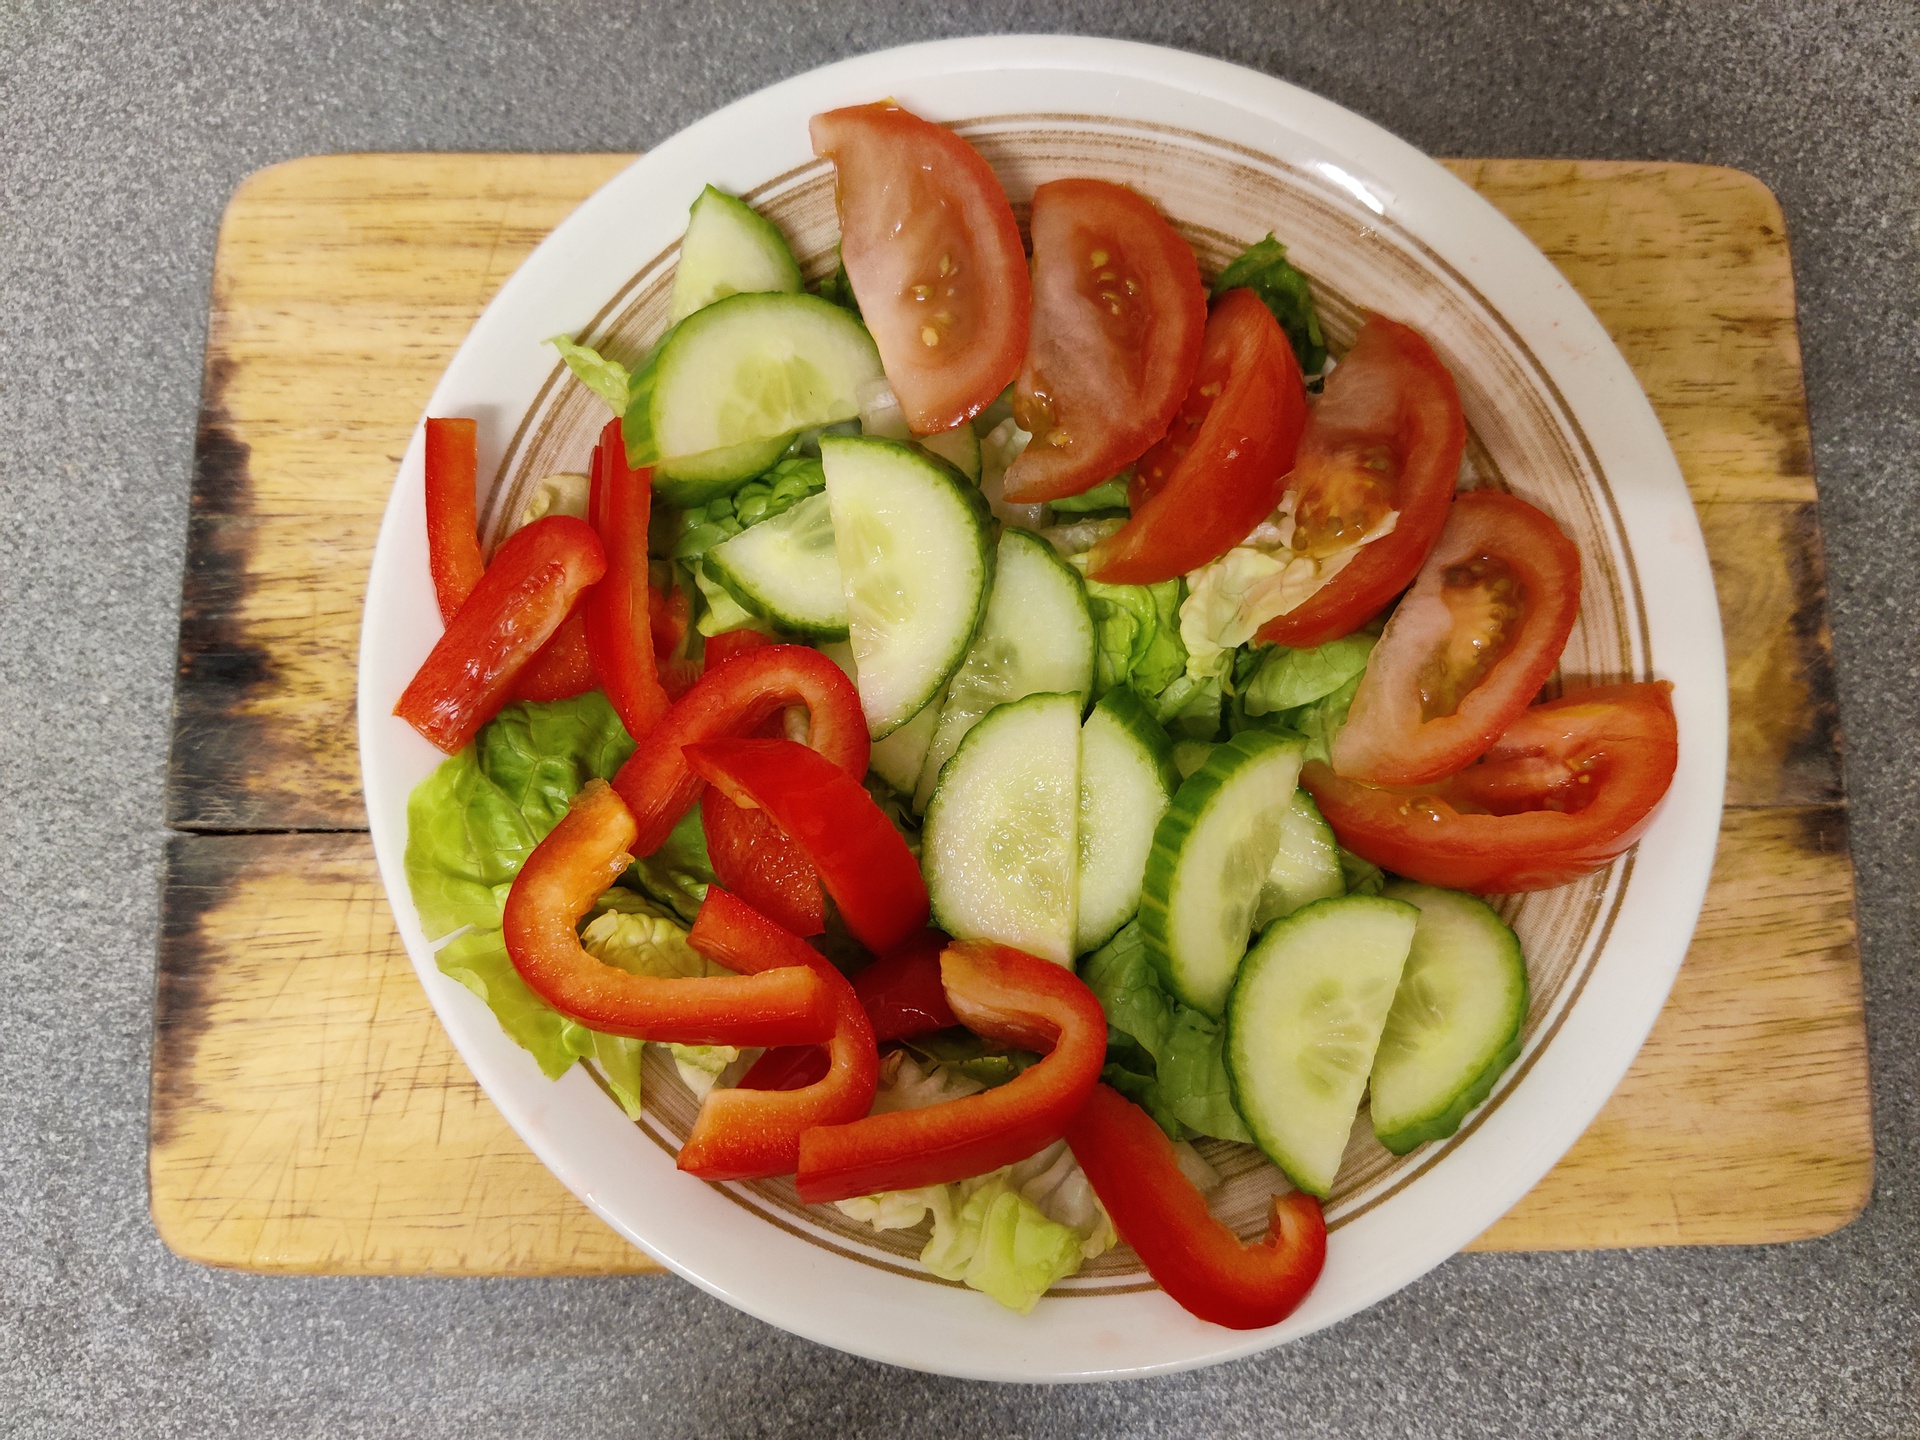 OnePlus 8T camera sample of a delicious salad